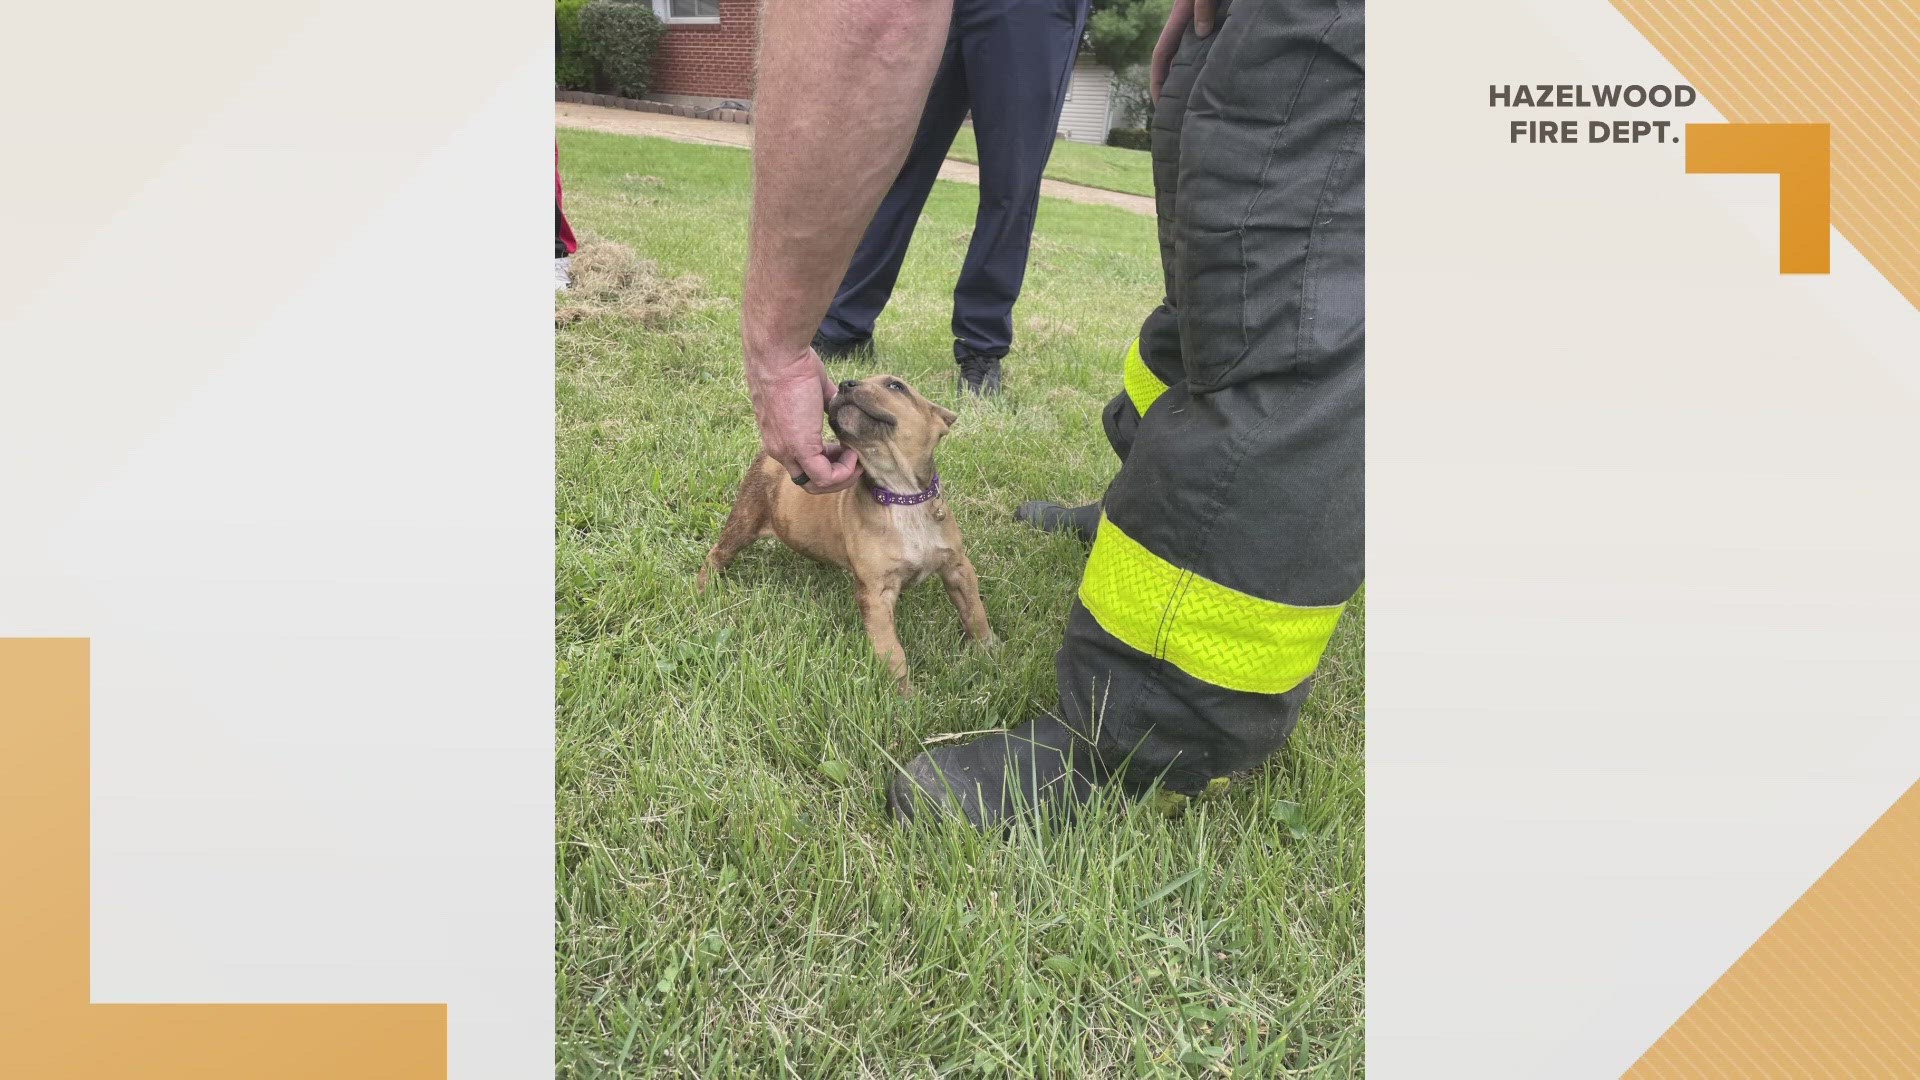 "Mini Me" was stuck when the Hazelwood Fire Department came to the rescue. She was reunited with her people.